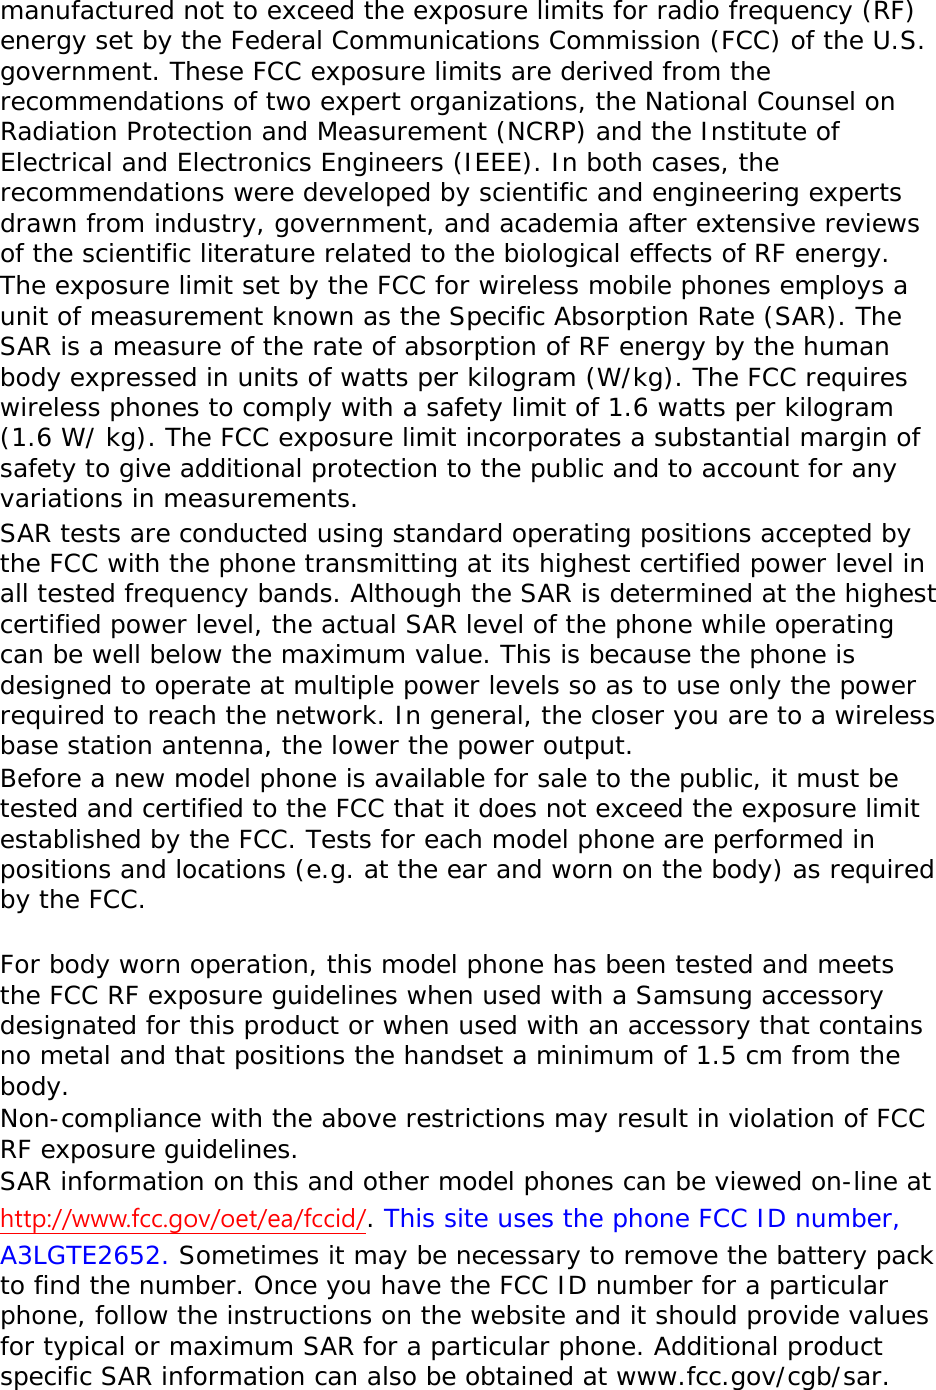 manufactured not to exceed the exposure limits for radio frequency (RF) energy set by the Federal Communications Commission (FCC) of the U.S. government. These FCC exposure limits are derived from the recommendations of two expert organizations, the National Counsel on Radiation Protection and Measurement (NCRP) and the Institute of Electrical and Electronics Engineers (IEEE). In both cases, the recommendations were developed by scientific and engineering experts drawn from industry, government, and academia after extensive reviews of the scientific literature related to the biological effects of RF energy. The exposure limit set by the FCC for wireless mobile phones employs a unit of measurement known as the Specific Absorption Rate (SAR). The SAR is a measure of the rate of absorption of RF energy by the human body expressed in units of watts per kilogram (W/kg). The FCC requires wireless phones to comply with a safety limit of 1.6 watts per kilogram (1.6 W/ kg). The FCC exposure limit incorporates a substantial margin of safety to give additional protection to the public and to account for any variations in measurements. SAR tests are conducted using standard operating positions accepted by the FCC with the phone transmitting at its highest certified power level in all tested frequency bands. Although the SAR is determined at the highest certified power level, the actual SAR level of the phone while operating can be well below the maximum value. This is because the phone is designed to operate at multiple power levels so as to use only the power required to reach the network. In general, the closer you are to a wireless base station antenna, the lower the power output. Before a new model phone is available for sale to the public, it must be tested and certified to the FCC that it does not exceed the exposure limit established by the FCC. Tests for each model phone are performed in positions and locations (e.g. at the ear and worn on the body) as required by the FCC.    For body worn operation, this model phone has been tested and meets the FCC RF exposure guidelines when used with a Samsung accessory designated for this product or when used with an accessory that contains no metal and that positions the handset a minimum of 1.5 cm from the body.  Non-compliance with the above restrictions may result in violation of FCC RF exposure guidelines. SAR information on this and other model phones can be viewed on-line at http://www.fcc.gov/oet/ea/fccid/. This site uses the phone FCC ID number, A3LGTE2652. Sometimes it may be necessary to remove the battery pack to find the number. Once you have the FCC ID number for a particular phone, follow the instructions on the website and it should provide values for typical or maximum SAR for a particular phone. Additional product specific SAR information can also be obtained at www.fcc.gov/cgb/sar. 